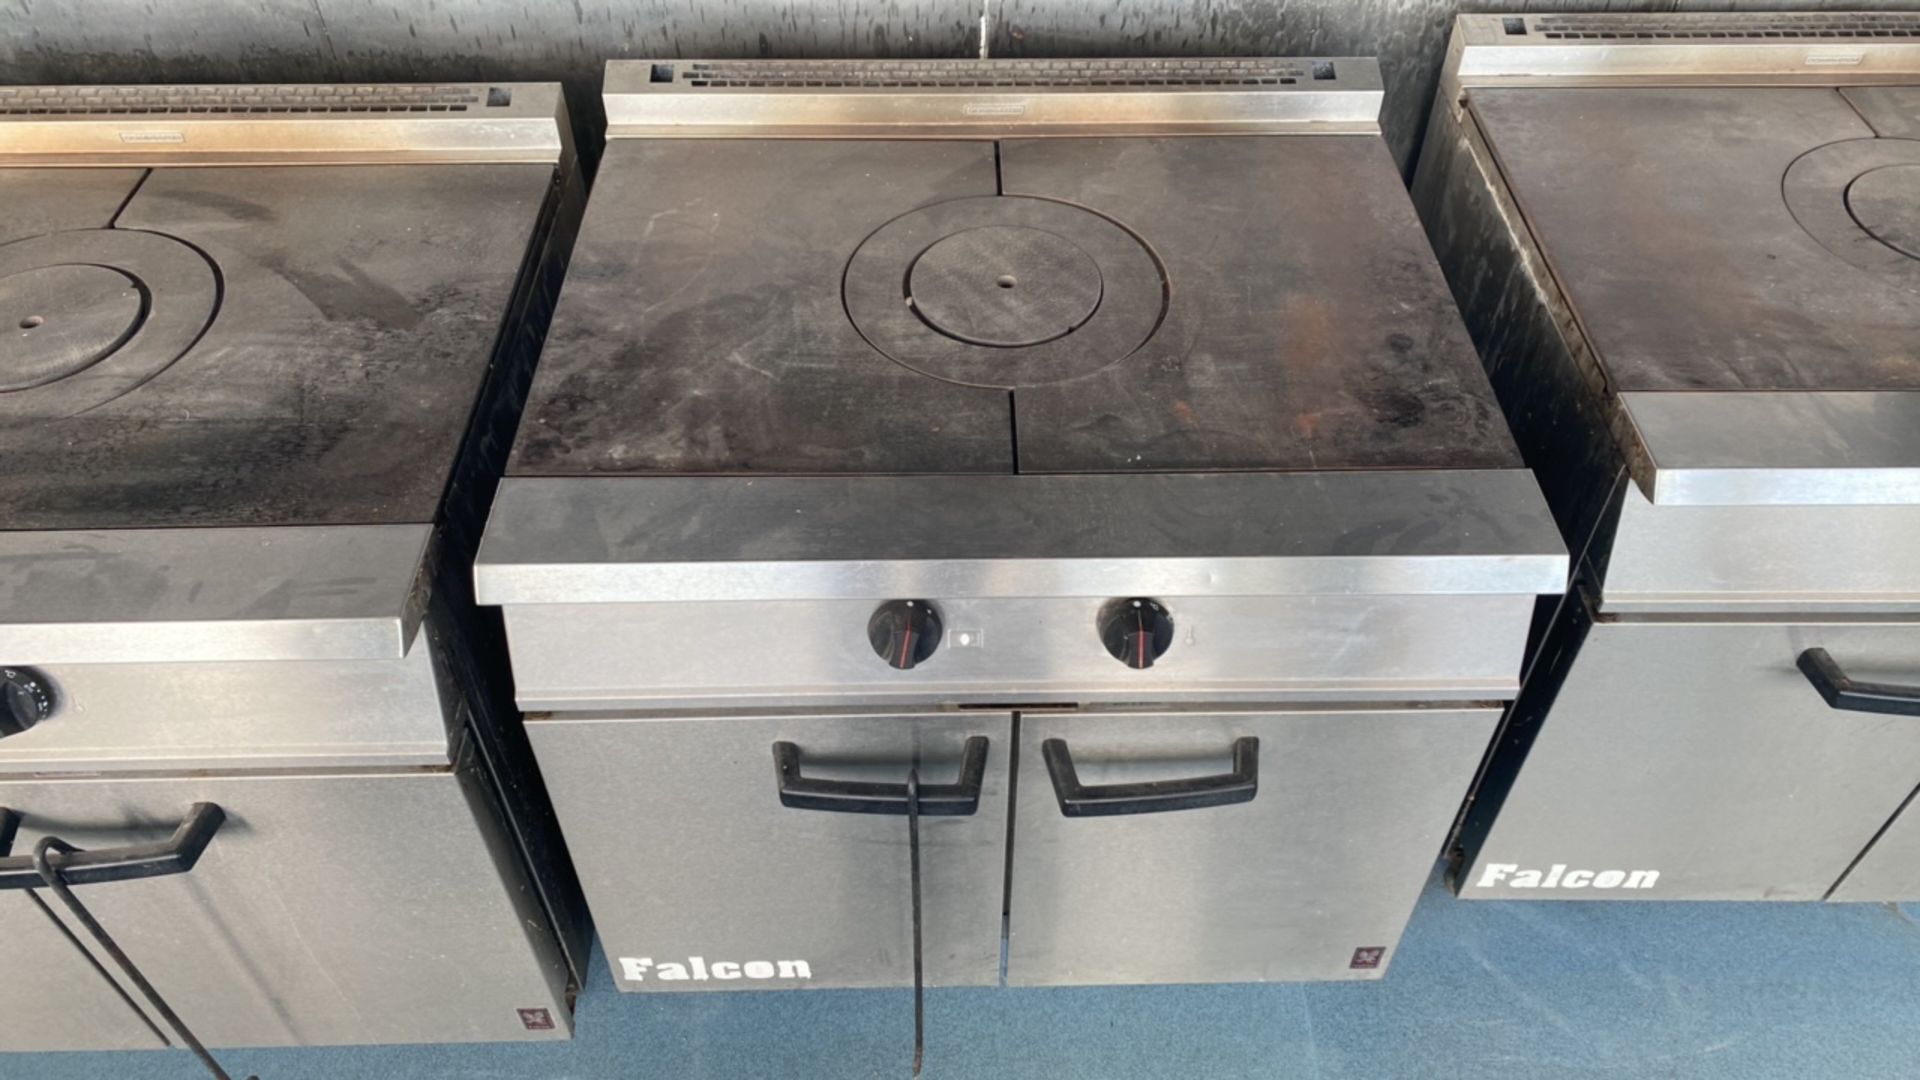 Falcon Dominator Solid Top Oven - Image 2 of 5